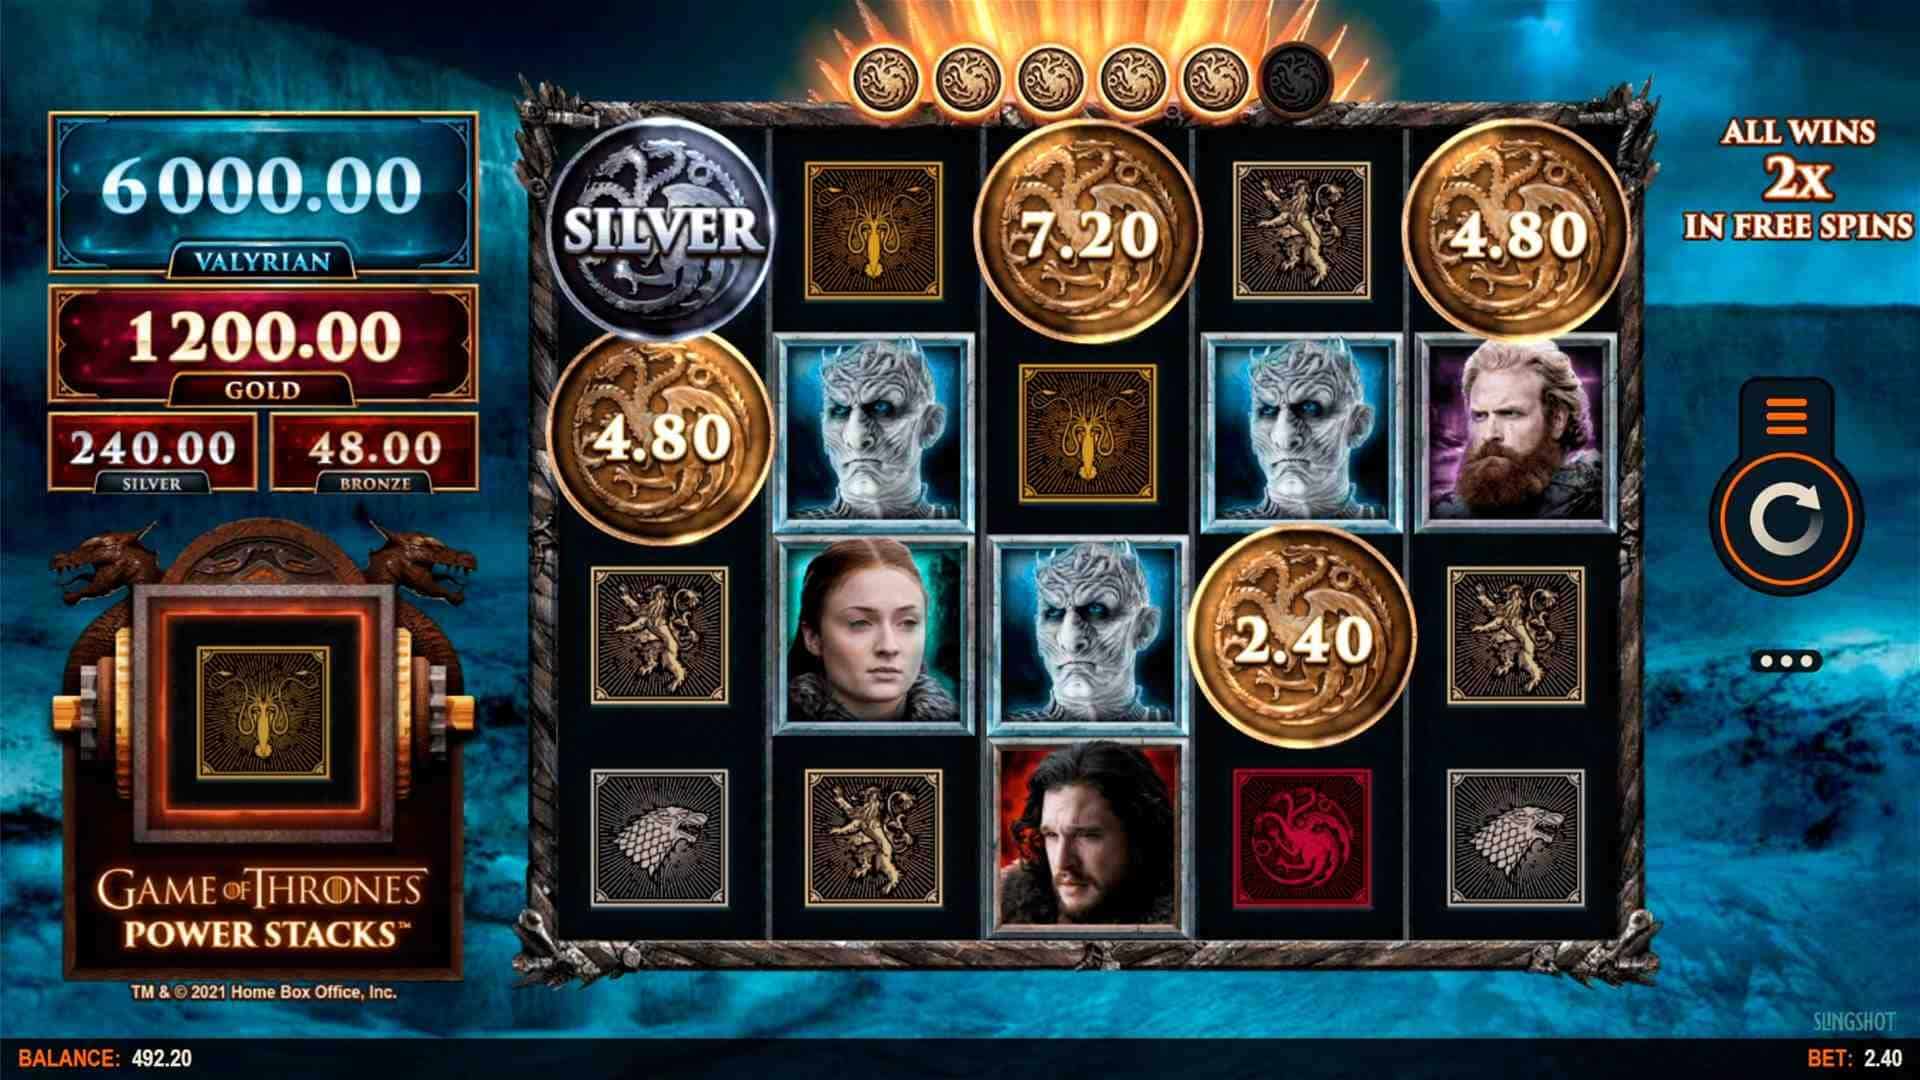 Game of Thrones Power Stacks Base Game